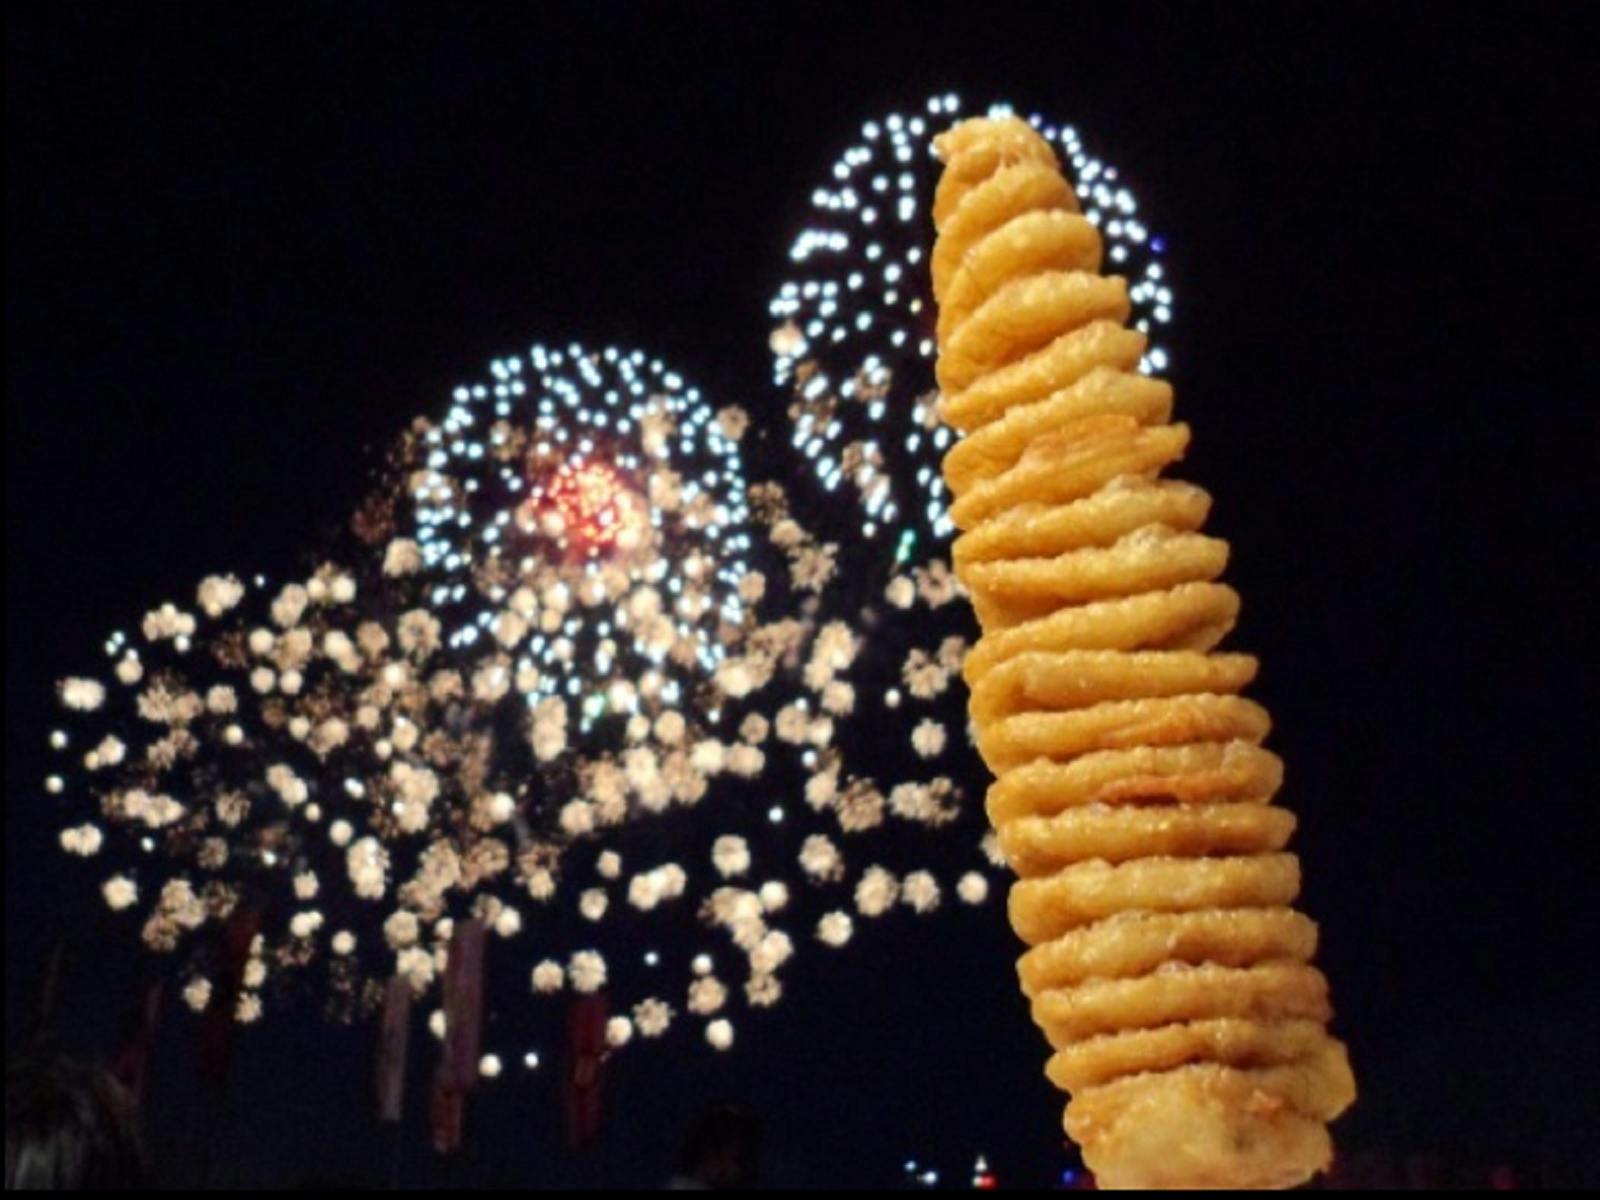 spiral potato in front of fireworks